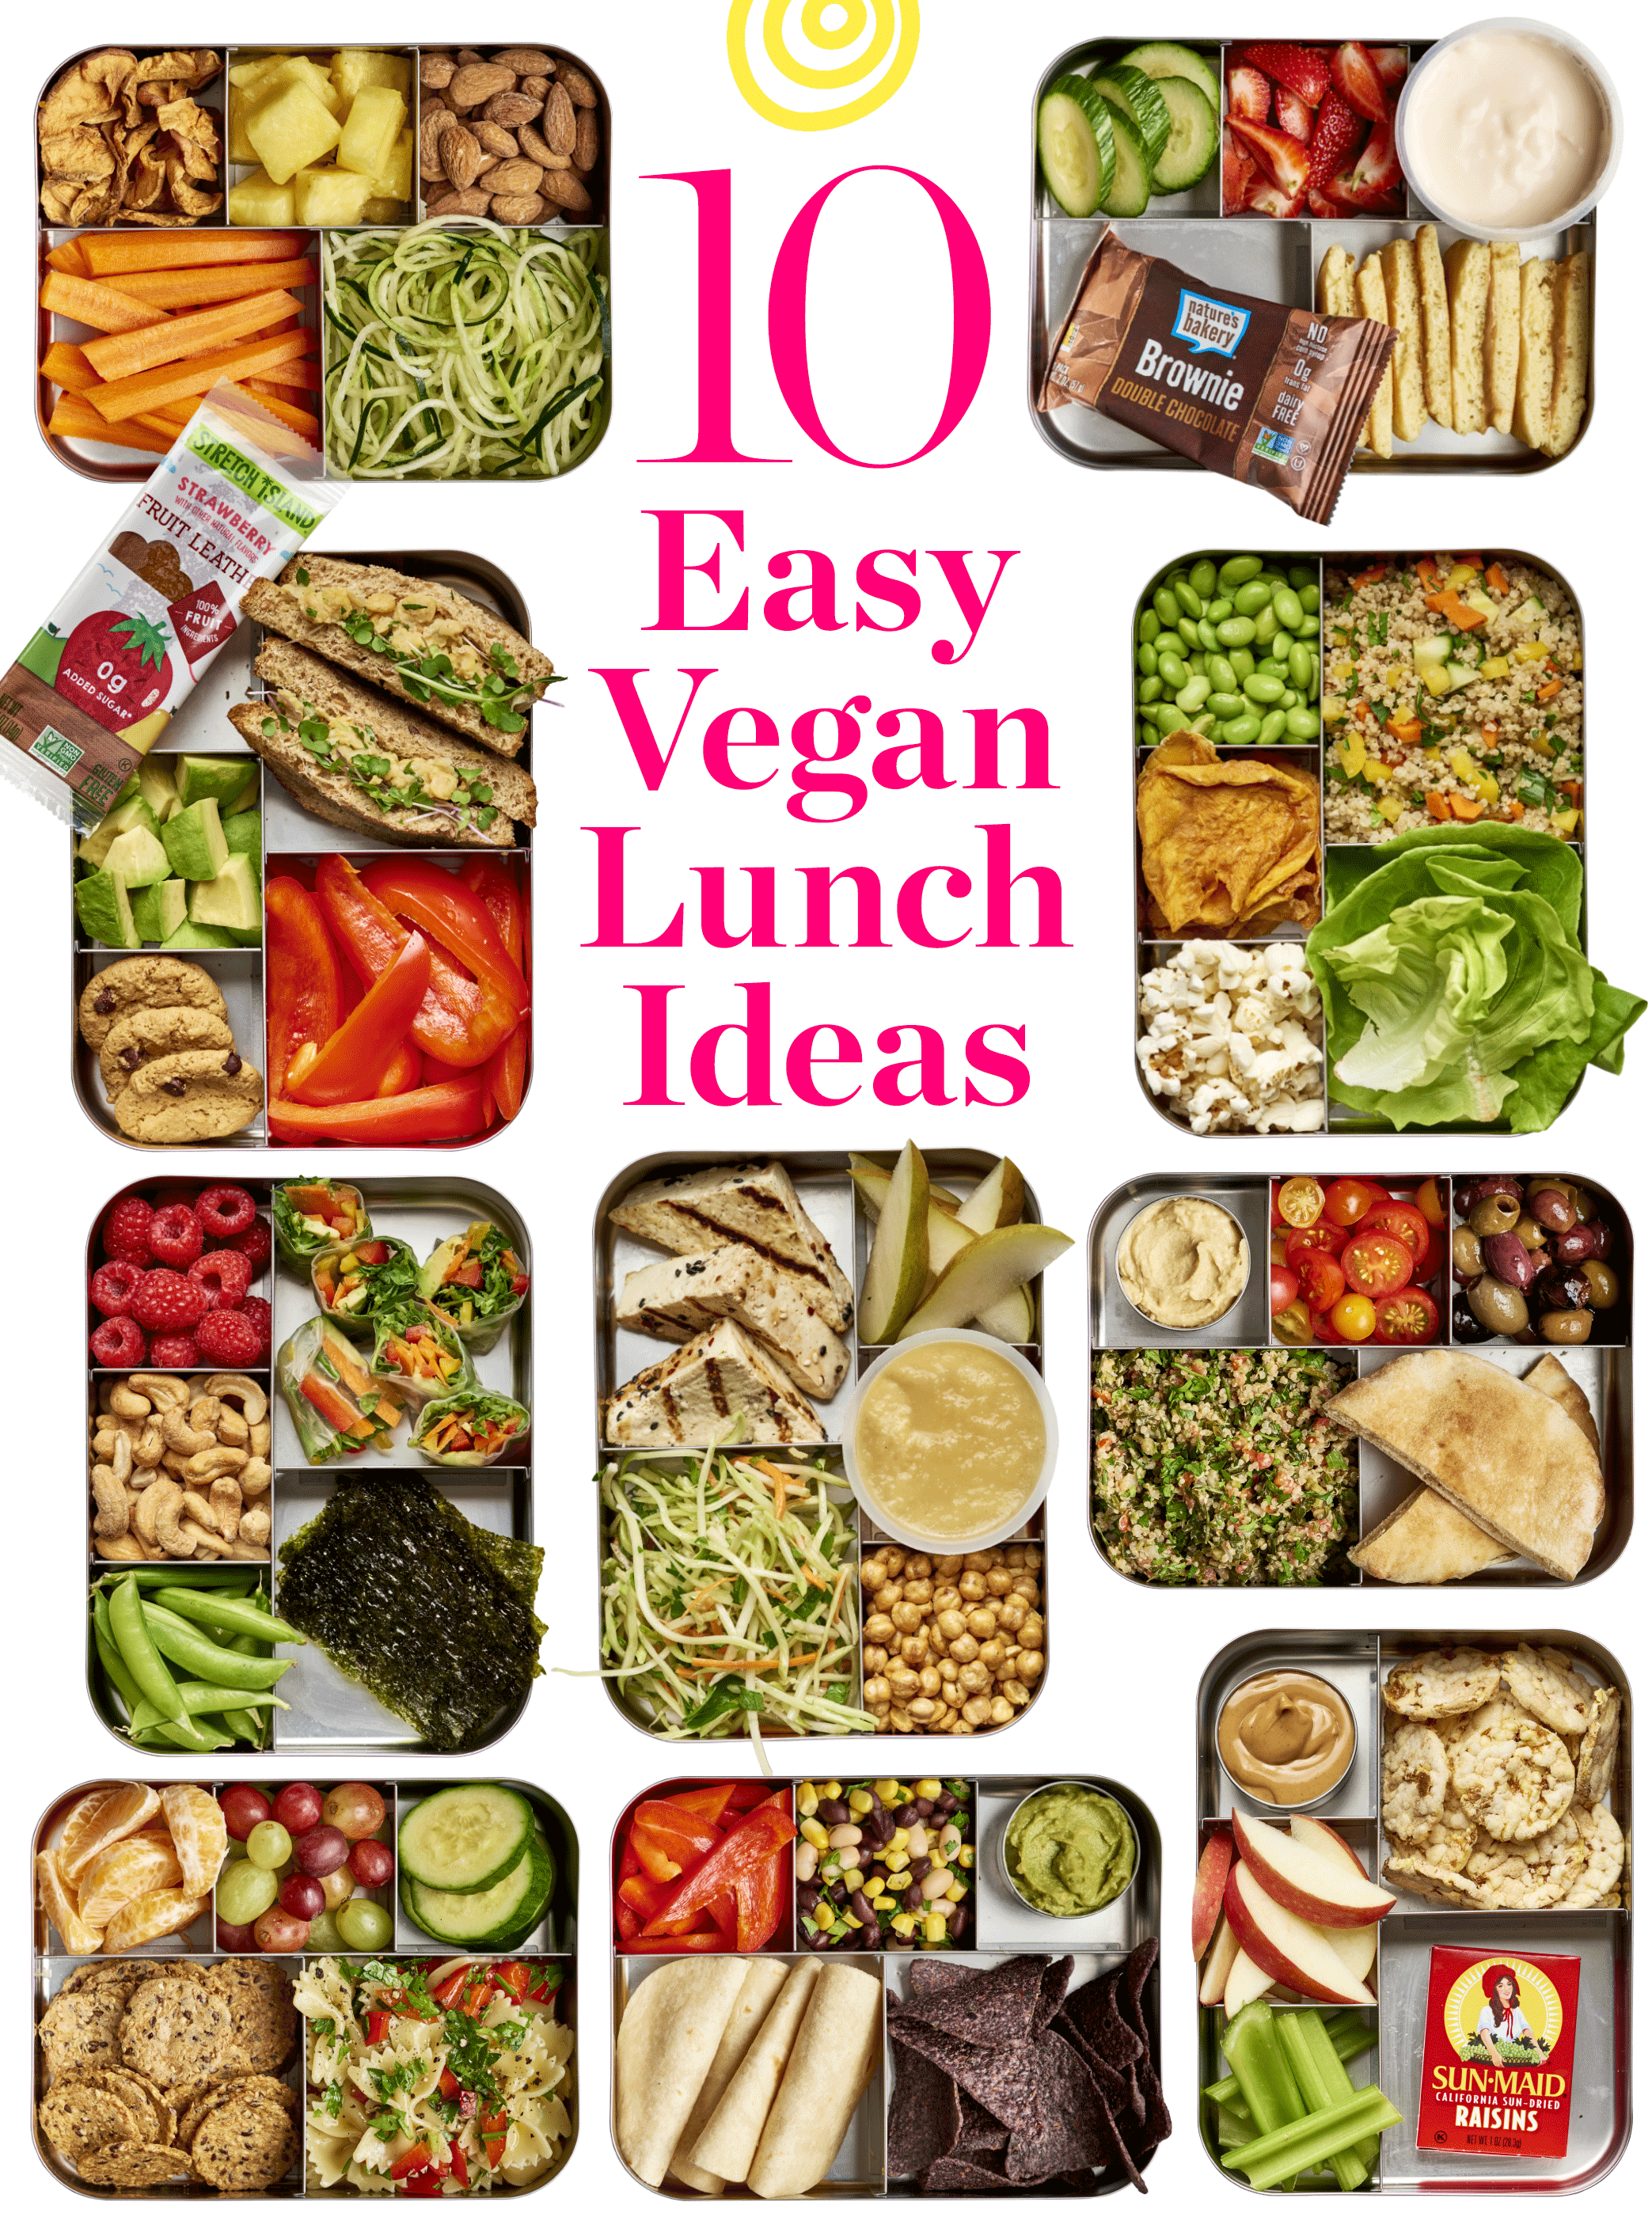 Steps to Prepare Vegan Lunch Recipes For Beginners